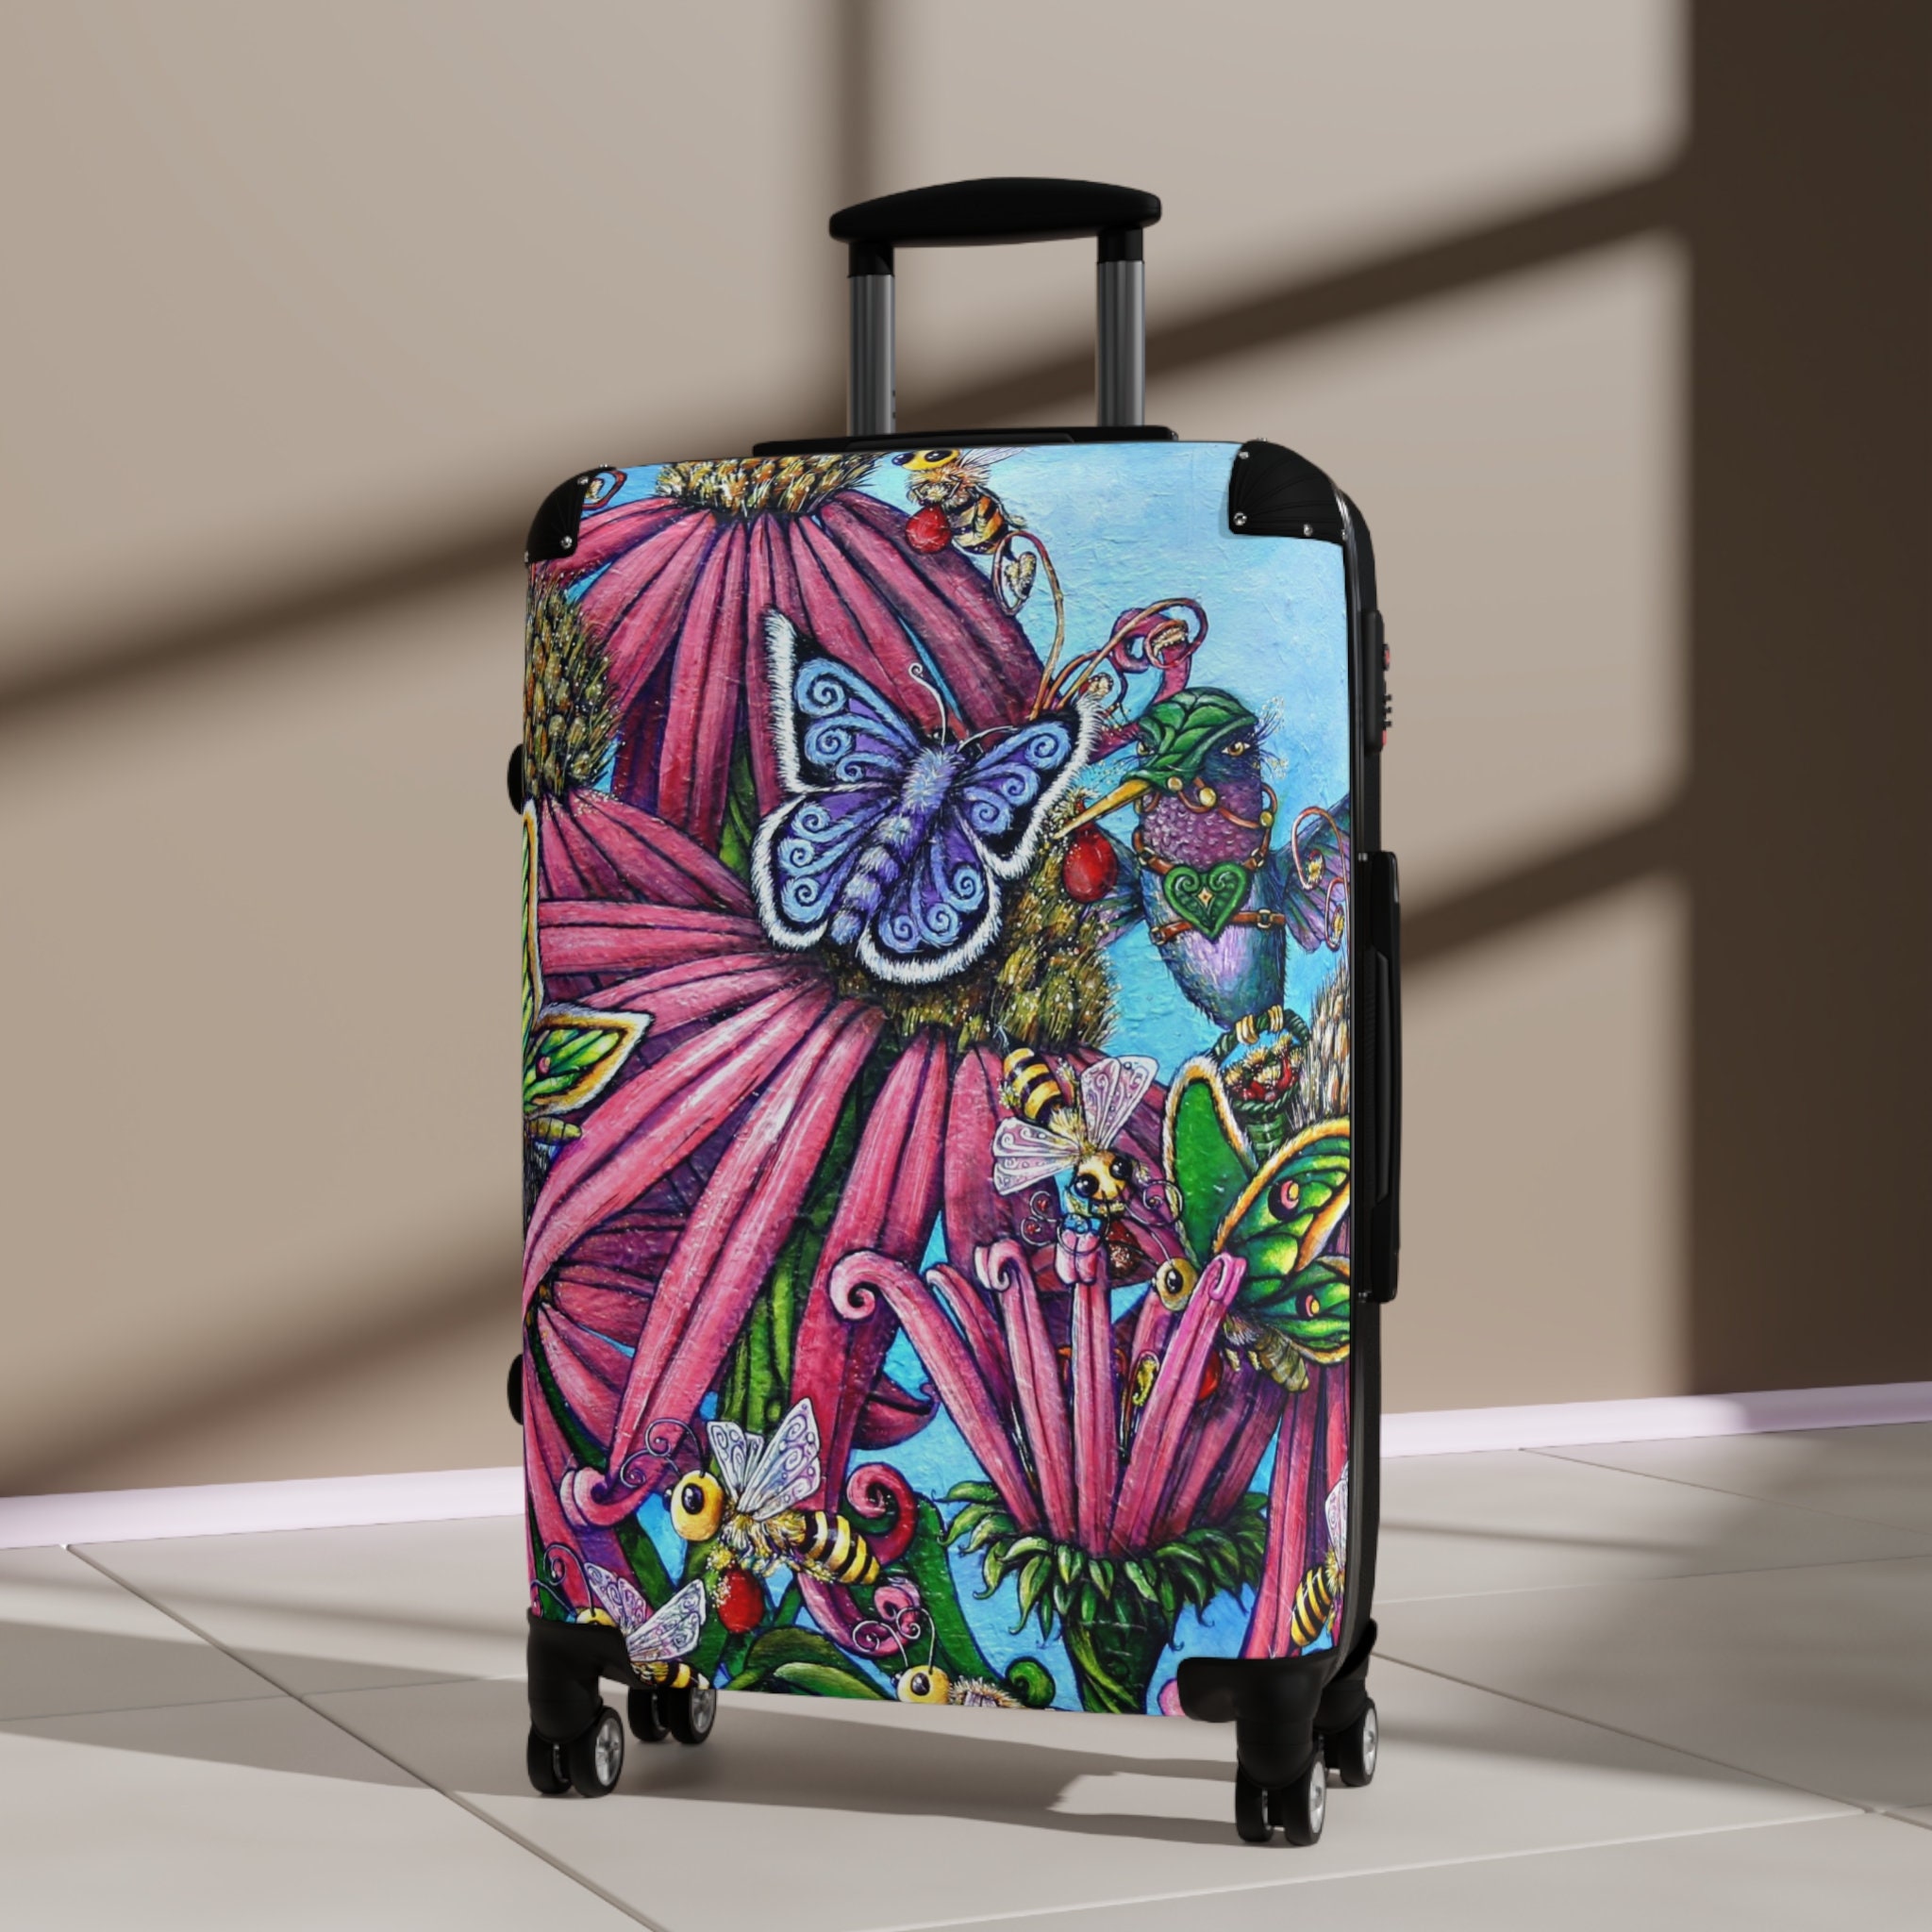 Personalized Luggage by Deedee Draz Art Unique Hand-painted 